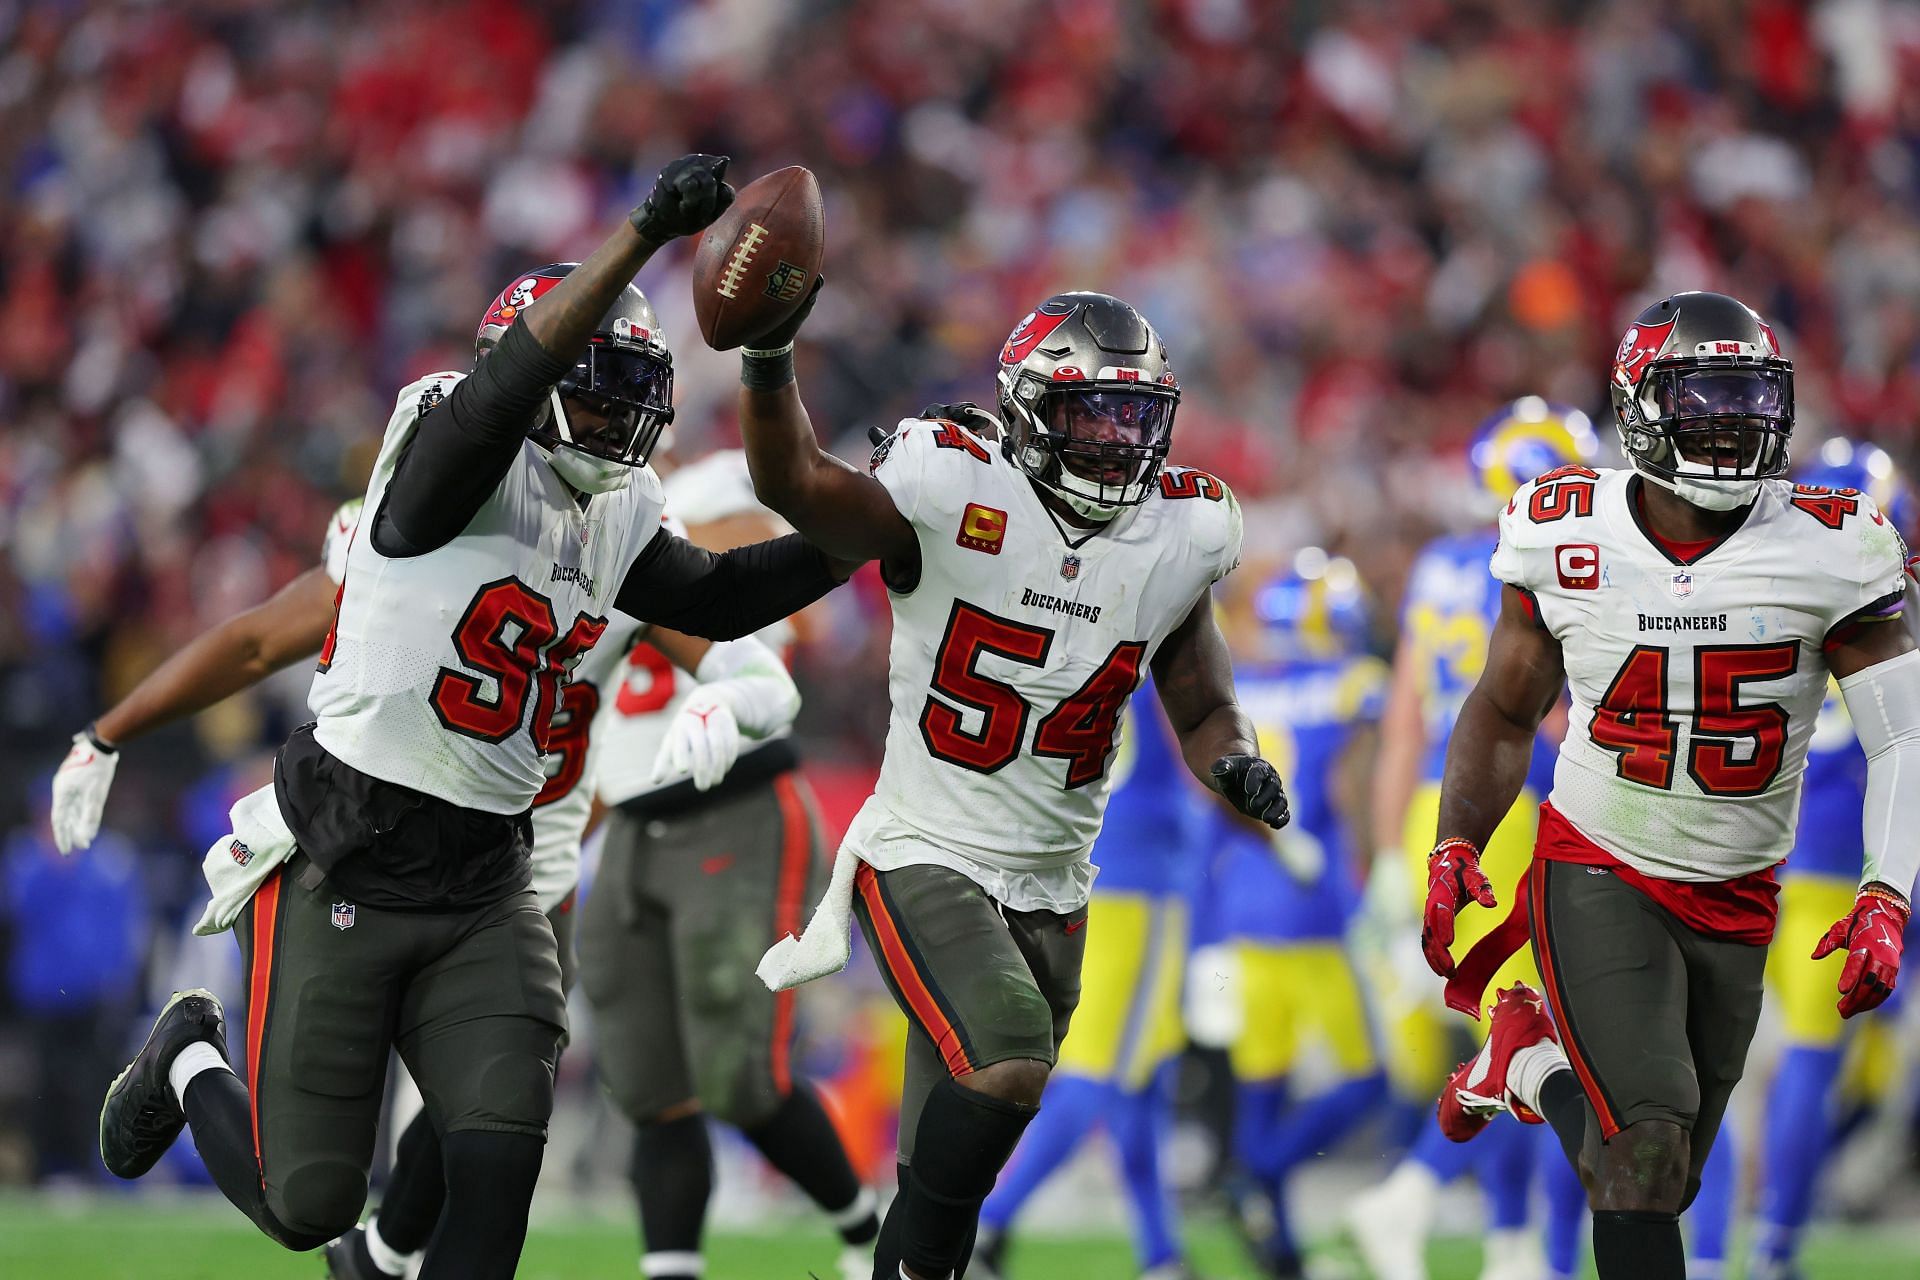 The Buccaneers should remain at the top of the NFC South